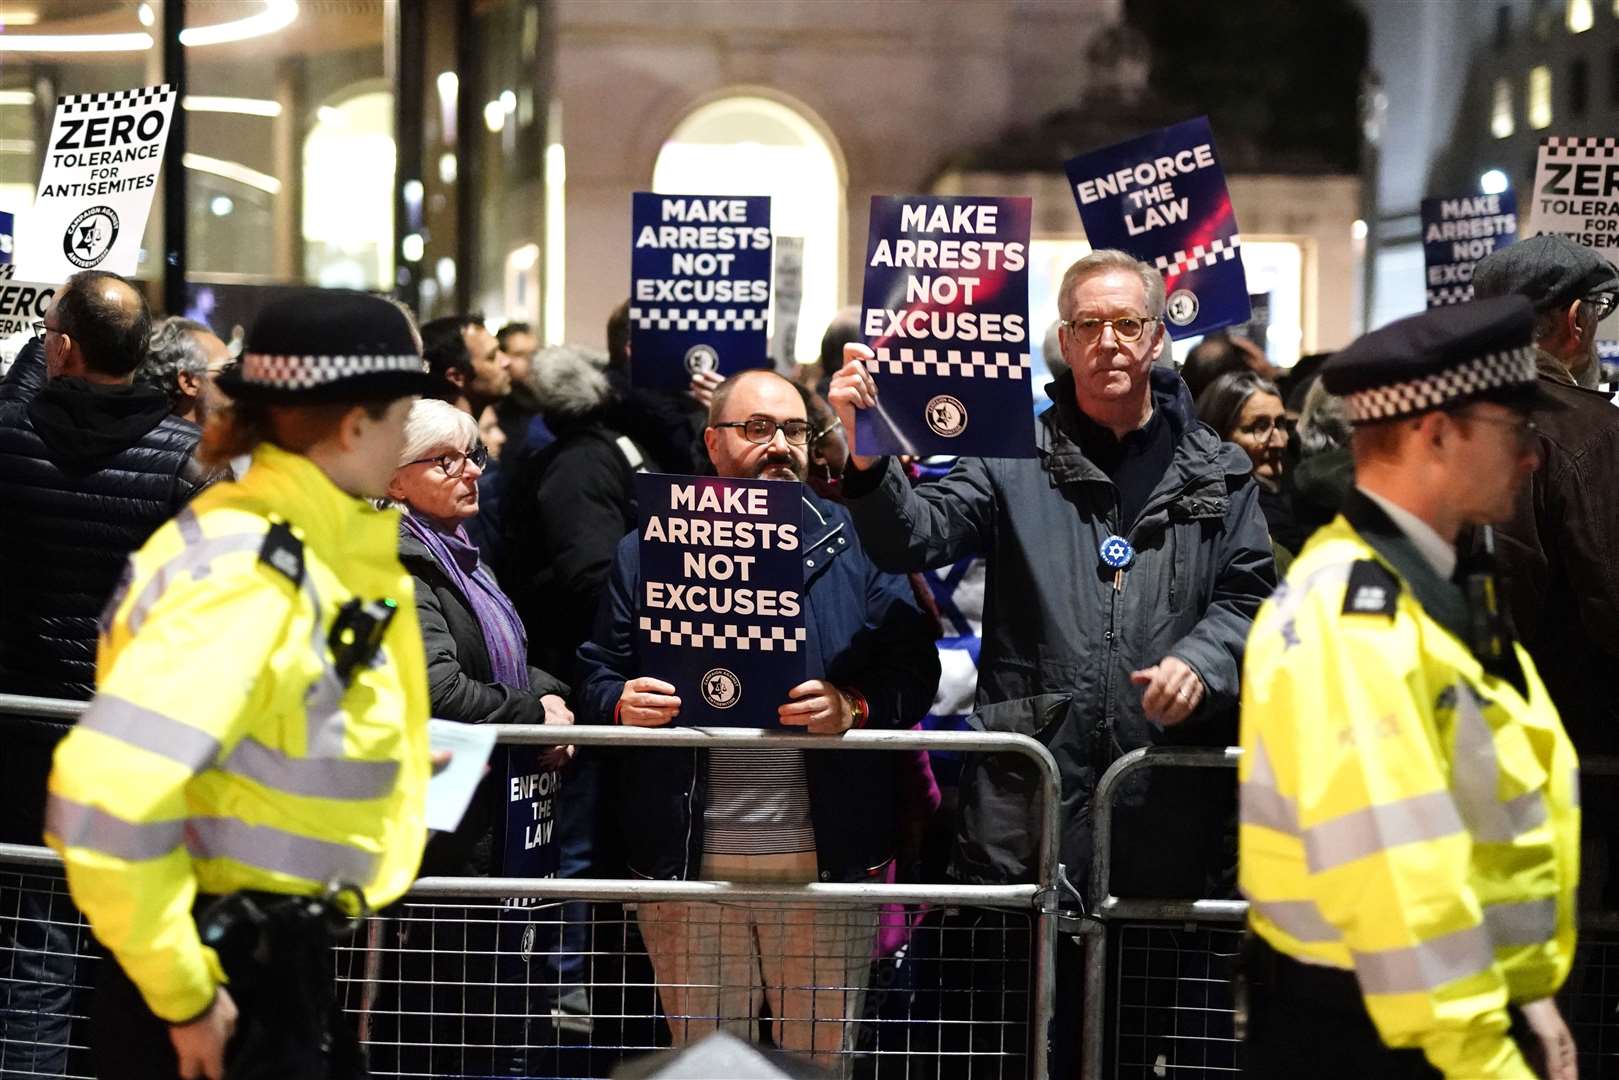 Campaigners holding up banners at the protest (Jordan Pettitt/PA)